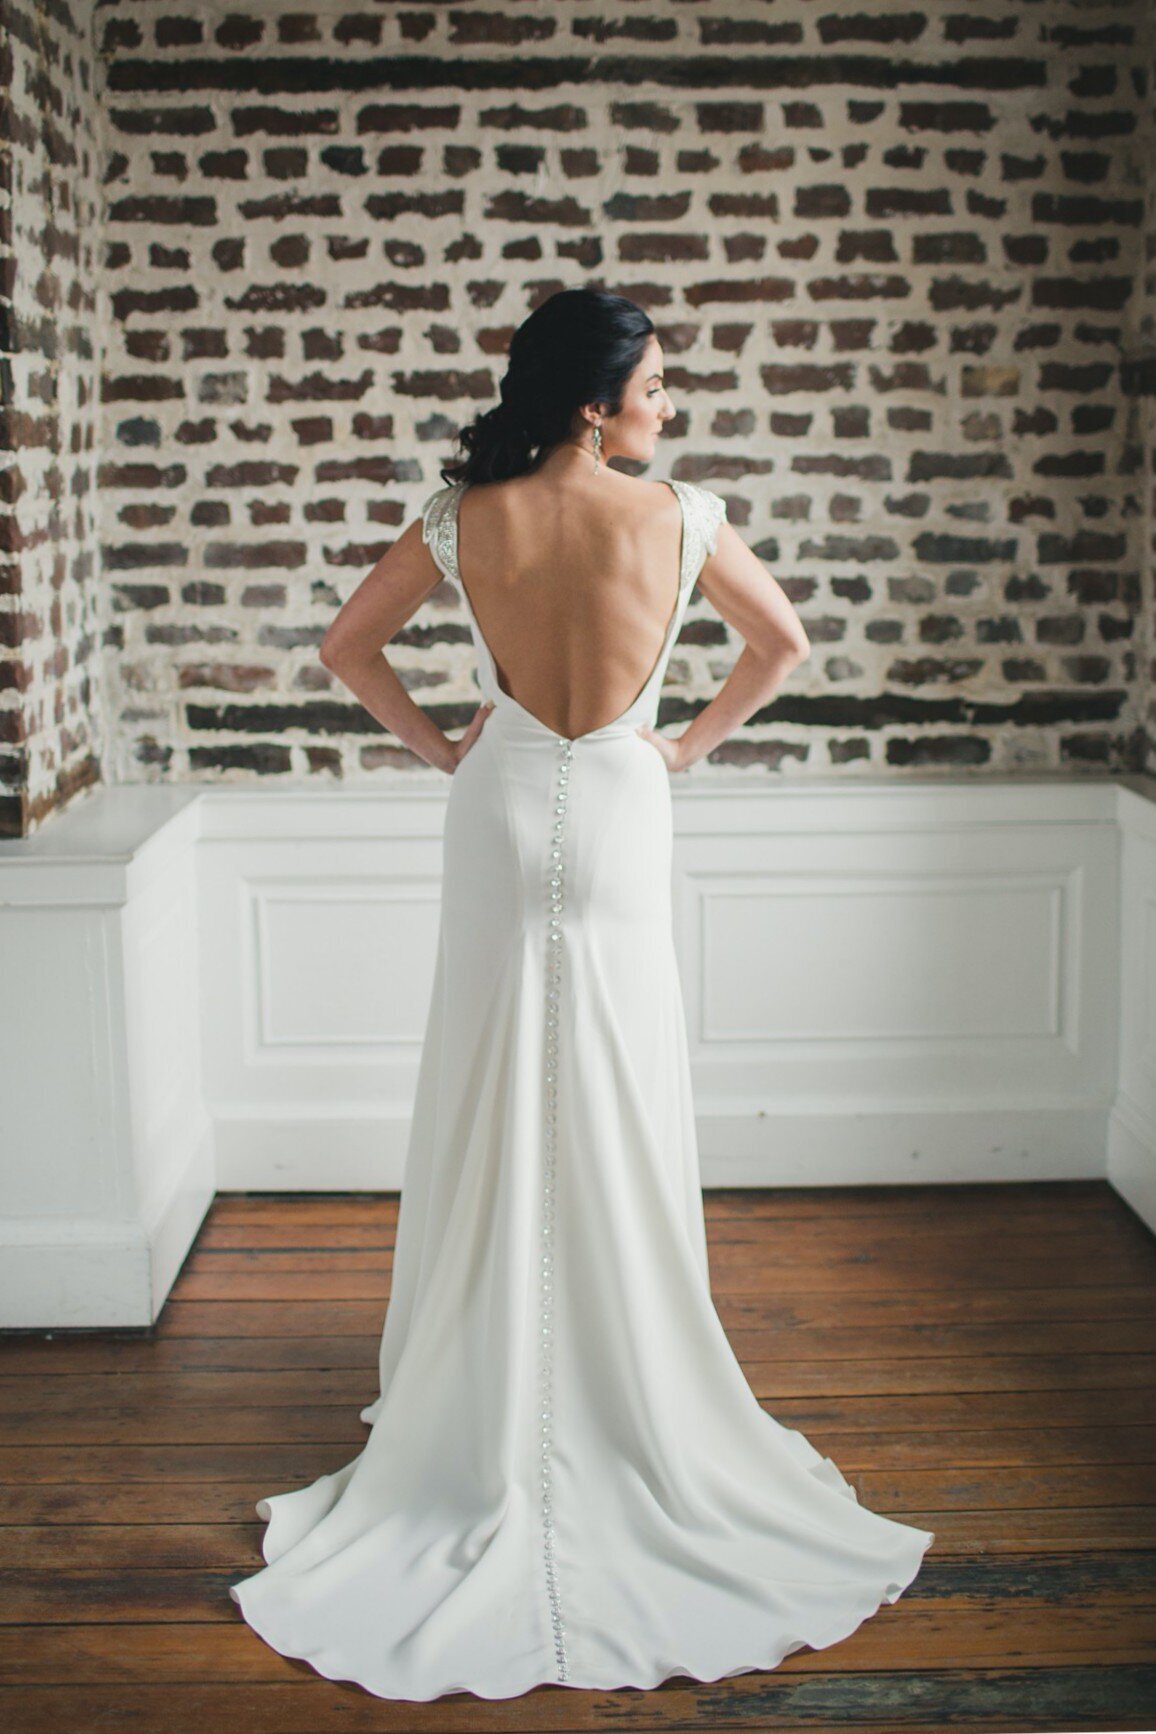 Tamarisk's low open back with crystal accents on the shoulders and crystal buttons down the train make this an elegant and timeless wedding dress.